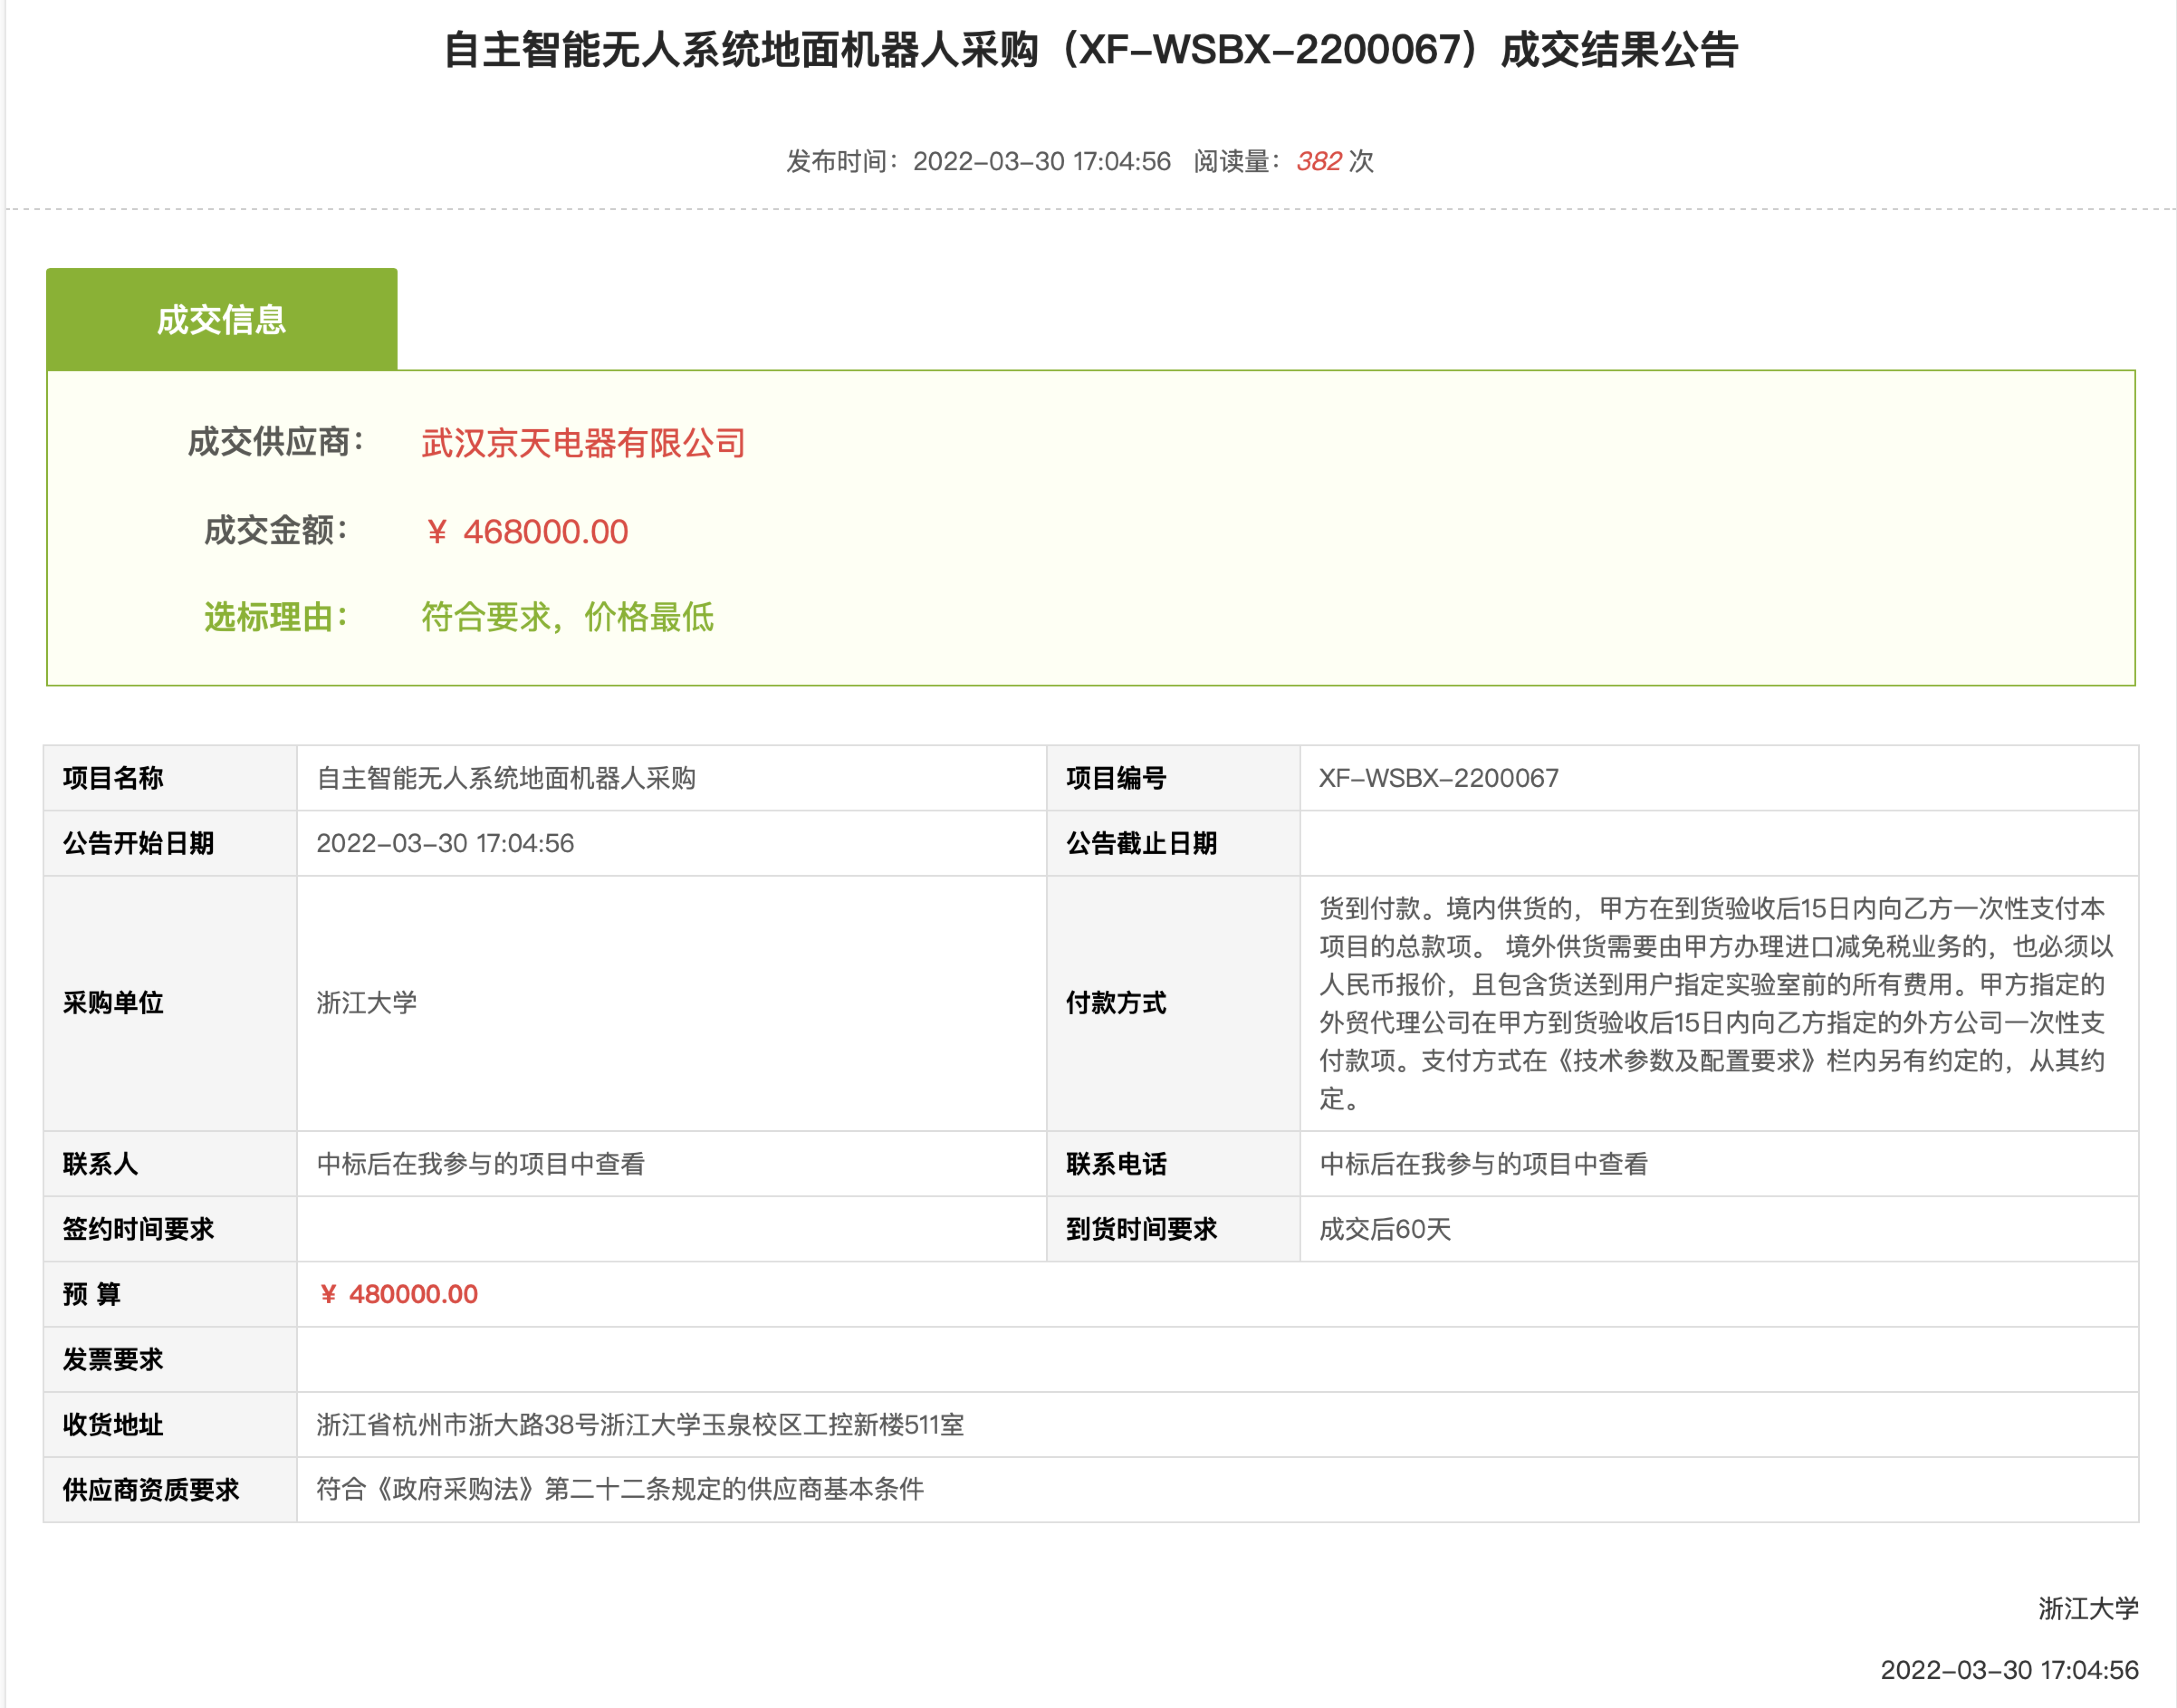 WeChat551feee1921192b37bc58aa08ce2c482.png